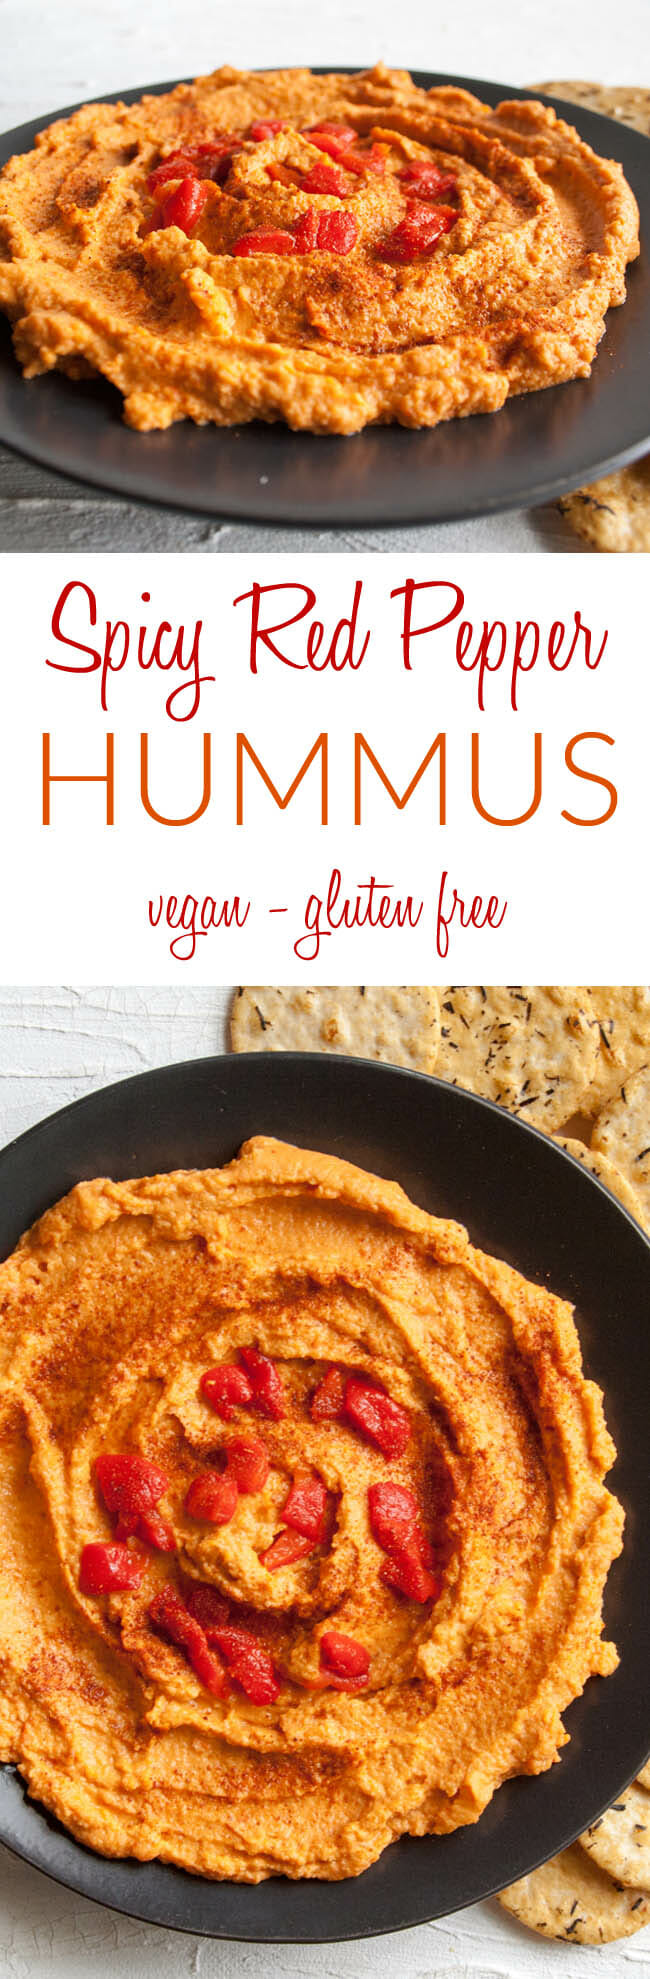 Spicy Red Pepper Hummus collage photo with text in the middle.